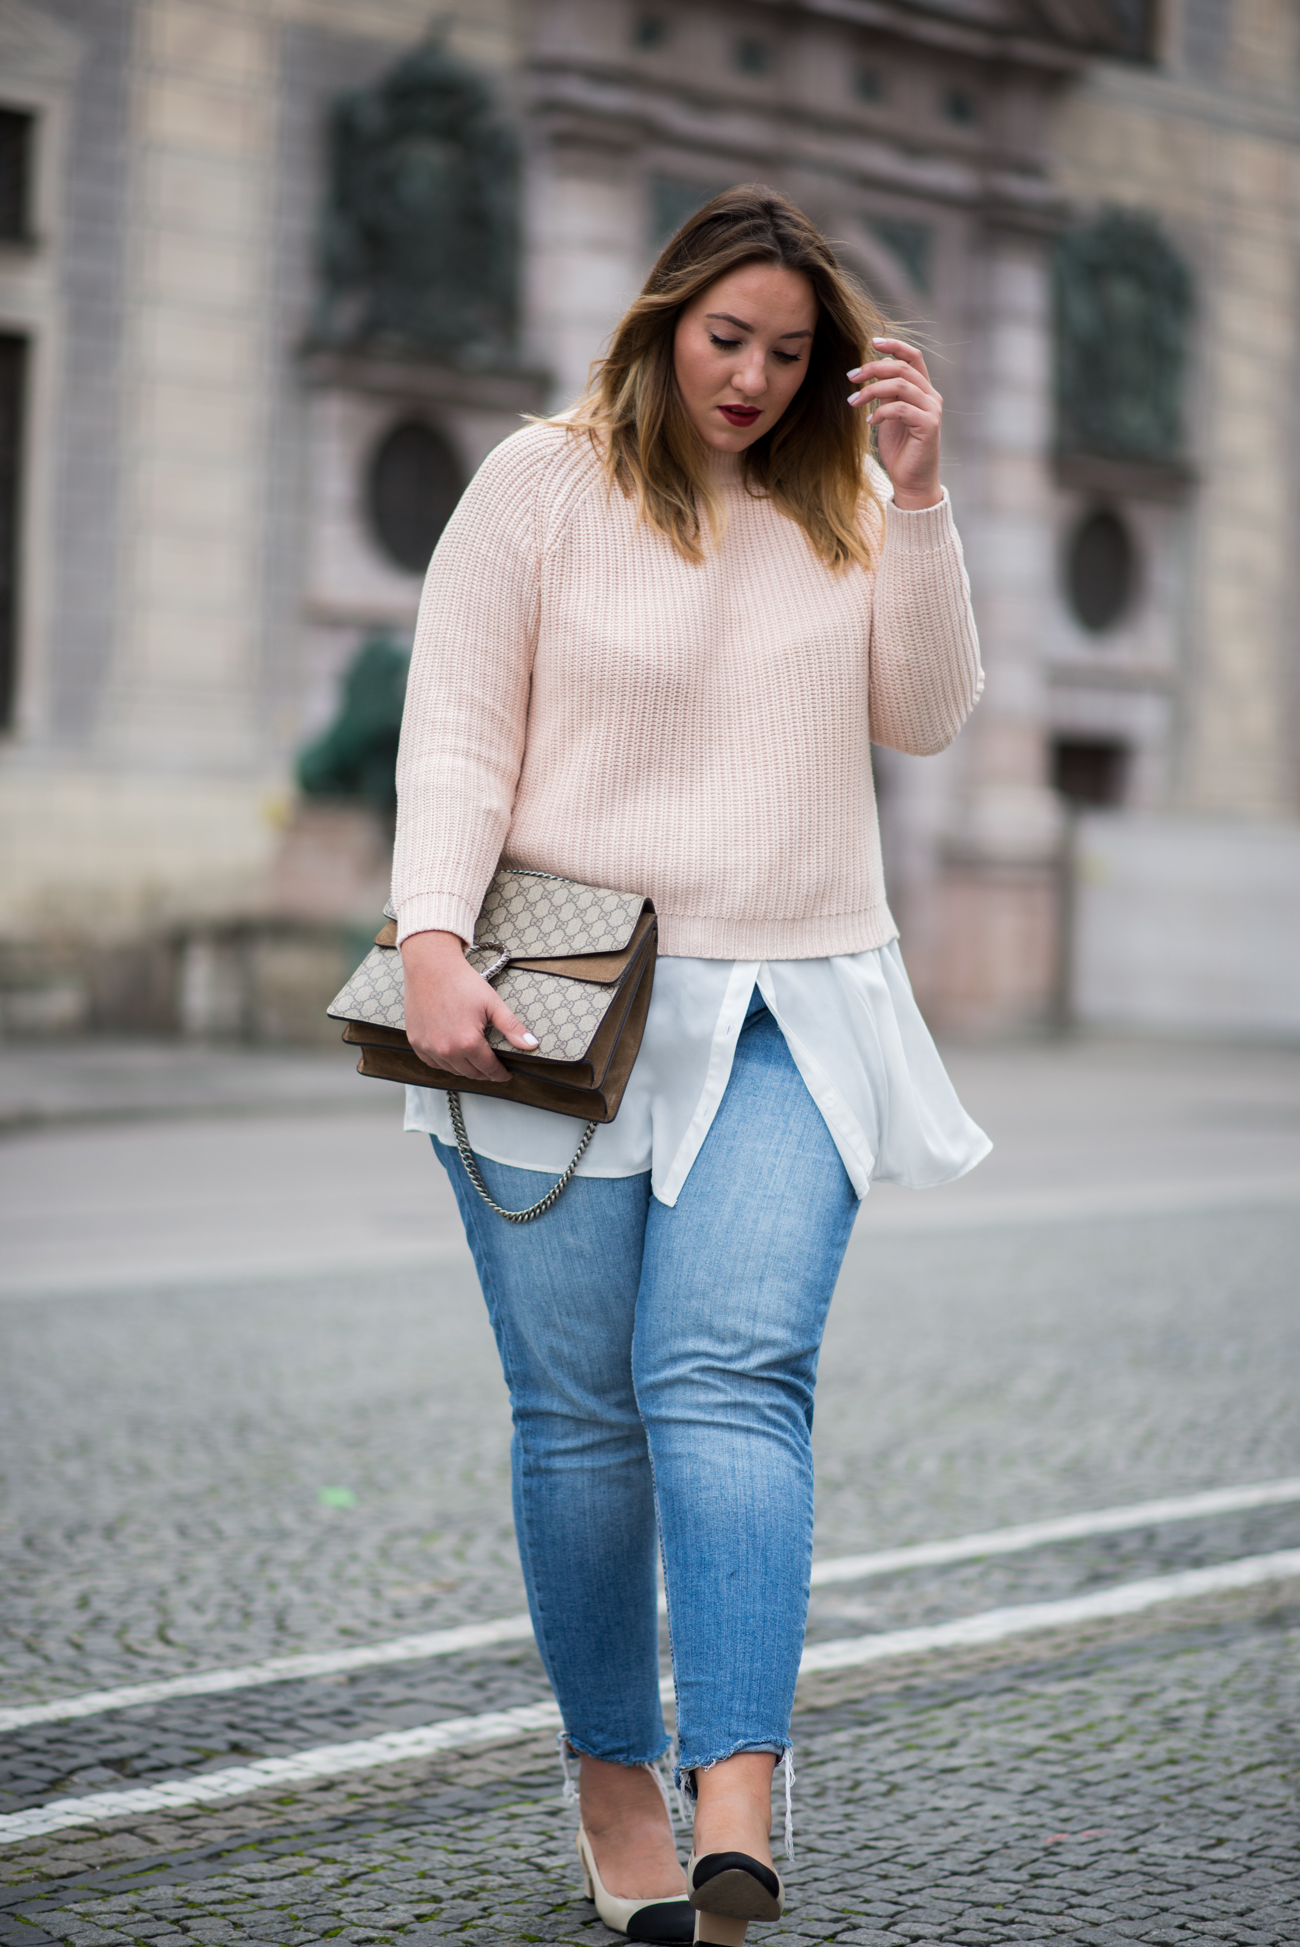 the-skinny-and-the-curvy-one_fashion_plussize_marina-rinaldi_chanel_jeans_blue-jeans_curve-outfit-inspo_muenchen-blogger_daily-outfit_plus-size-blog_plus-size-blogger-deutschland_-7-von-23